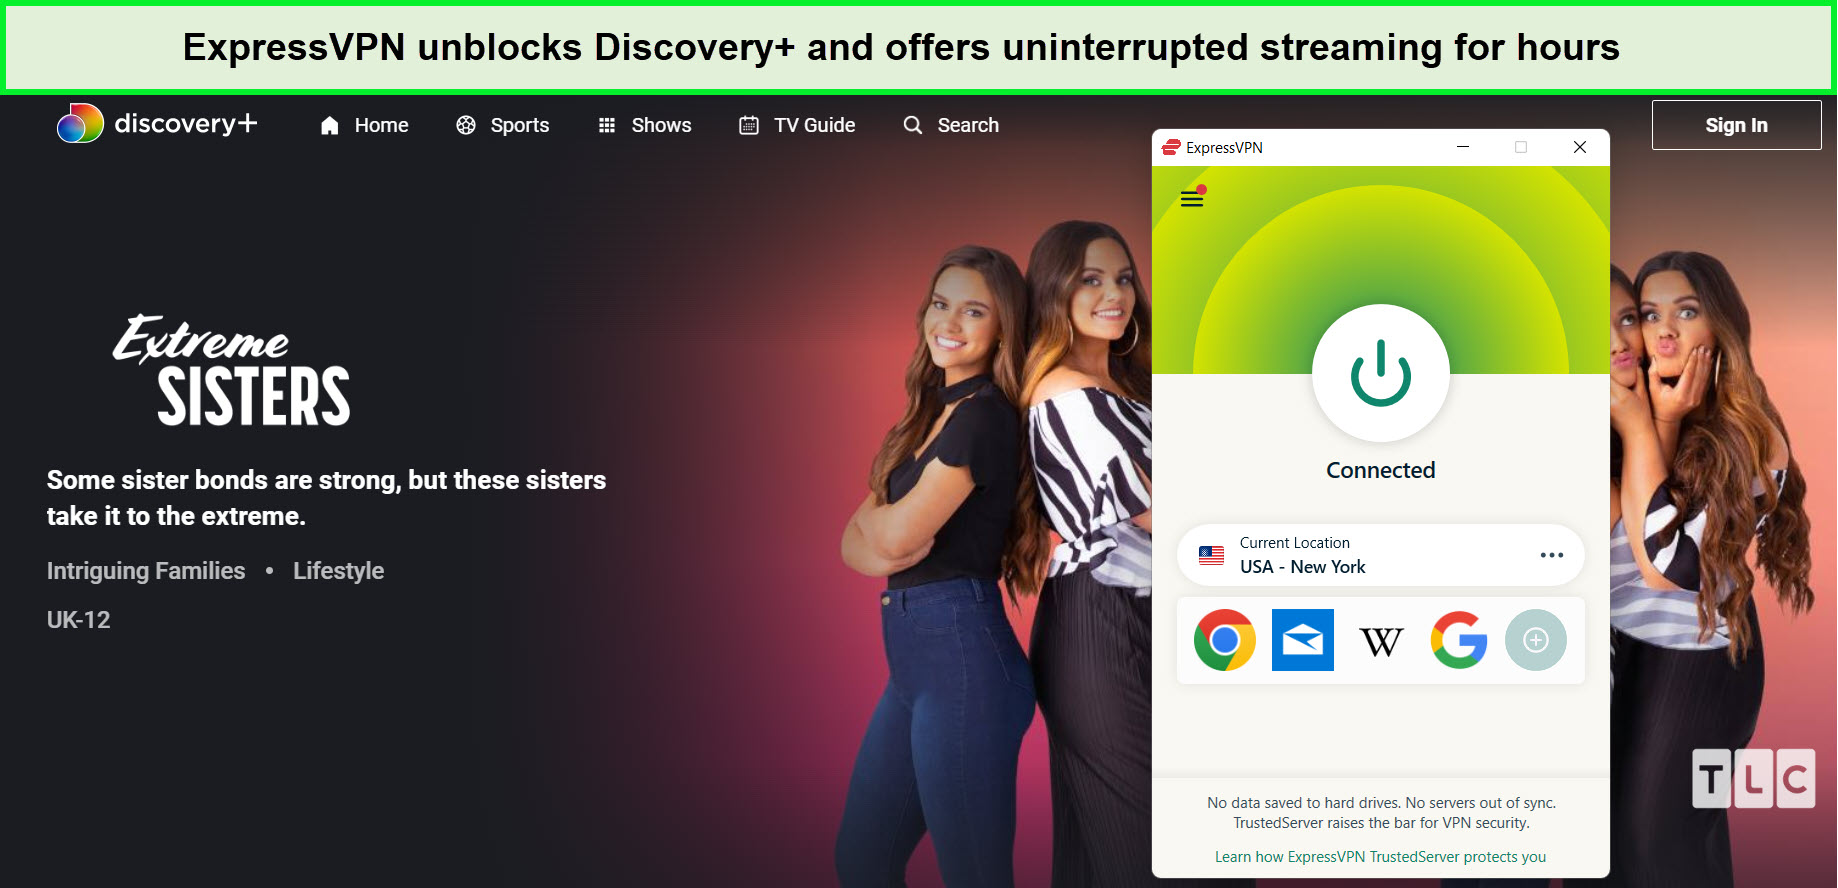 expressvpn-unblocks-extreme-sisters-on-discovery-plus-in-uk